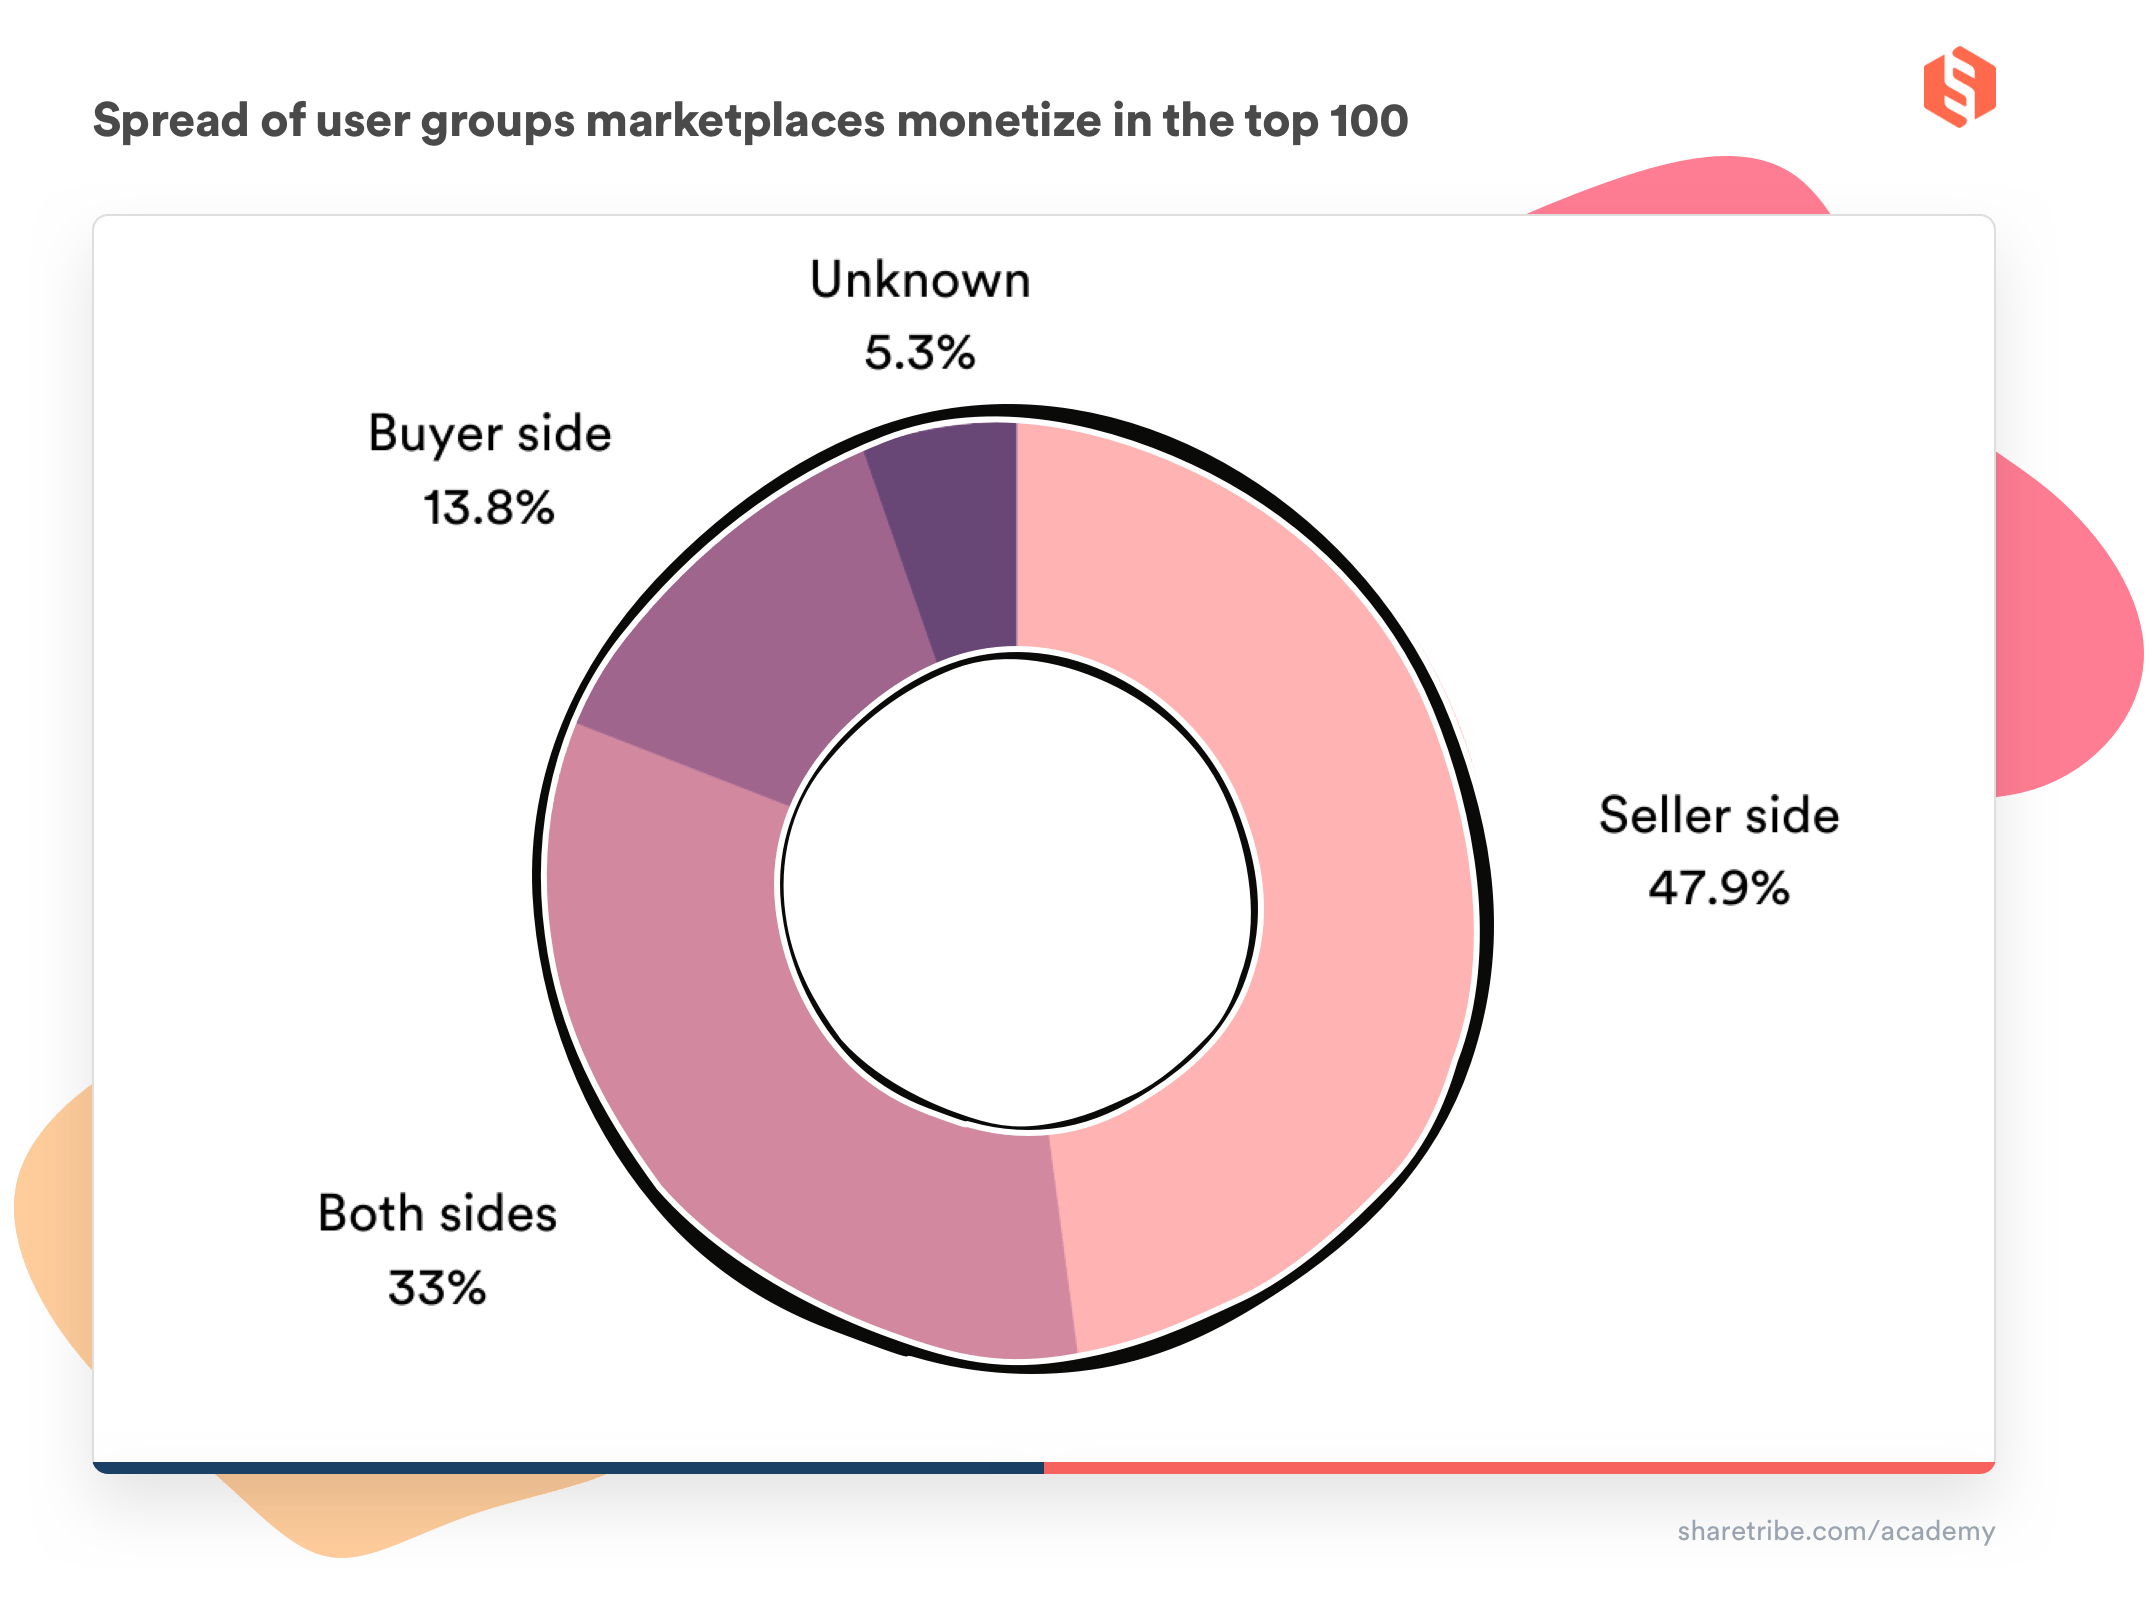 A donut chart with percentages on which side of the marketplace (buyers, sellers, or both) is monetized in the top 100 